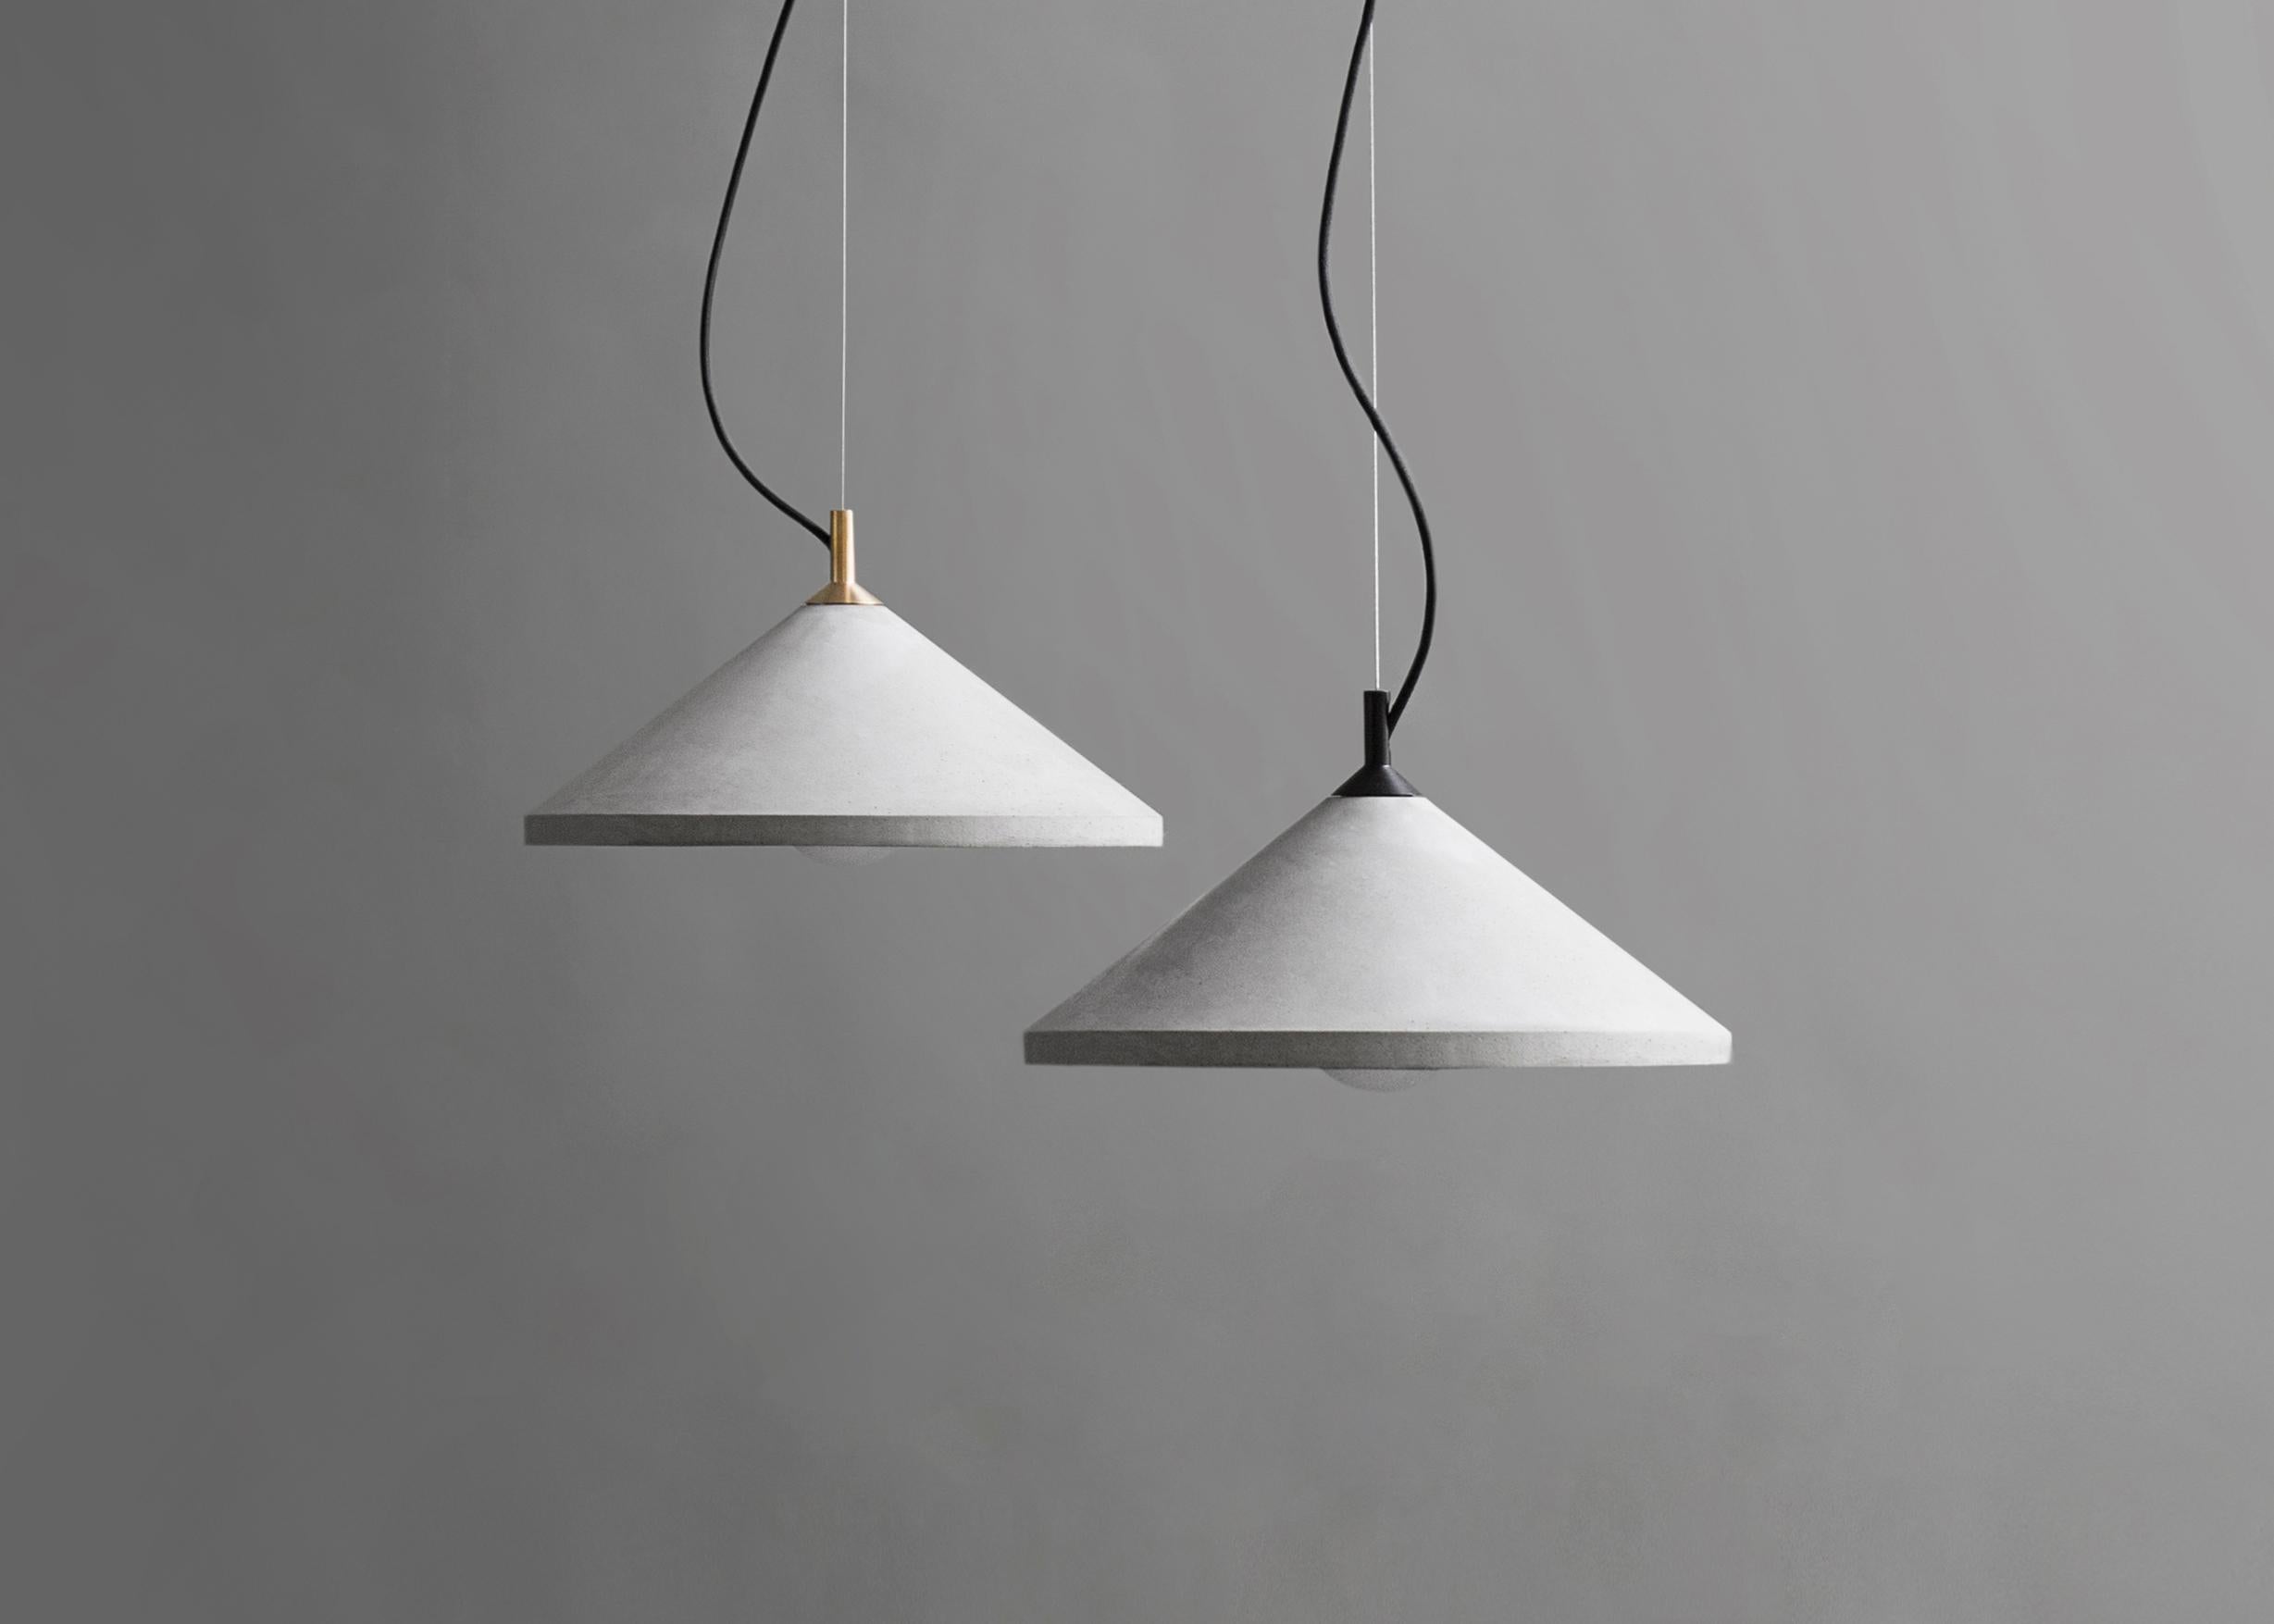 Chinese Concrete and Brass Pendant Lamp, “Ren, ” L, from Concrete Collection by Bentu